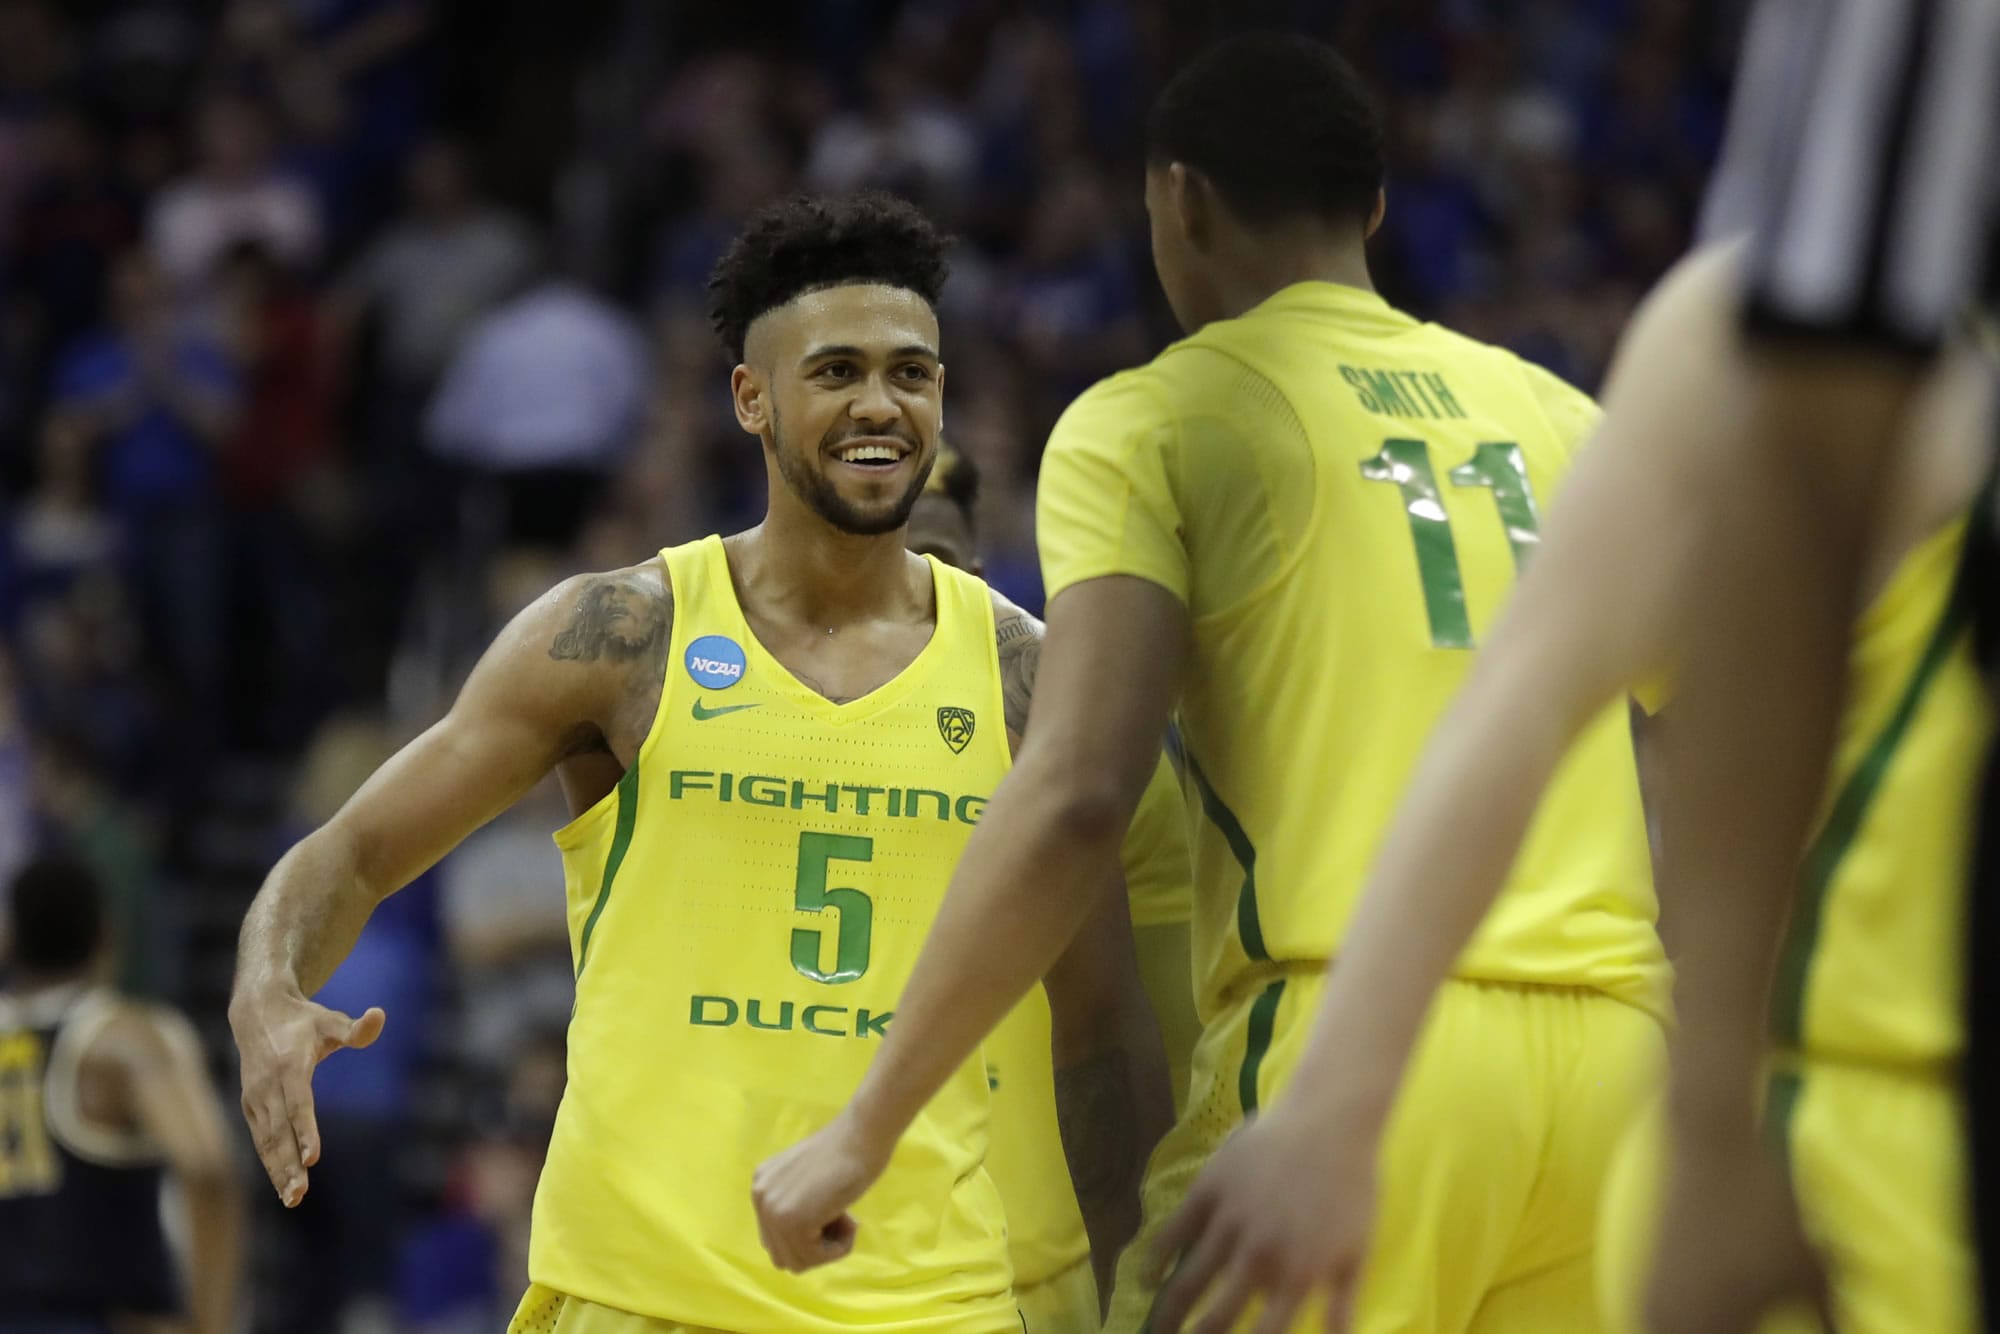 Oregon guard Tyler Dorsey (5) celebrates with Keith Smith (11) at the end of a regional semifinal against Michigan in the NCAA men's college basketball tournament, Thursday, March 23, 2017, in Kansas City, Mo. Oregon won 69-68.